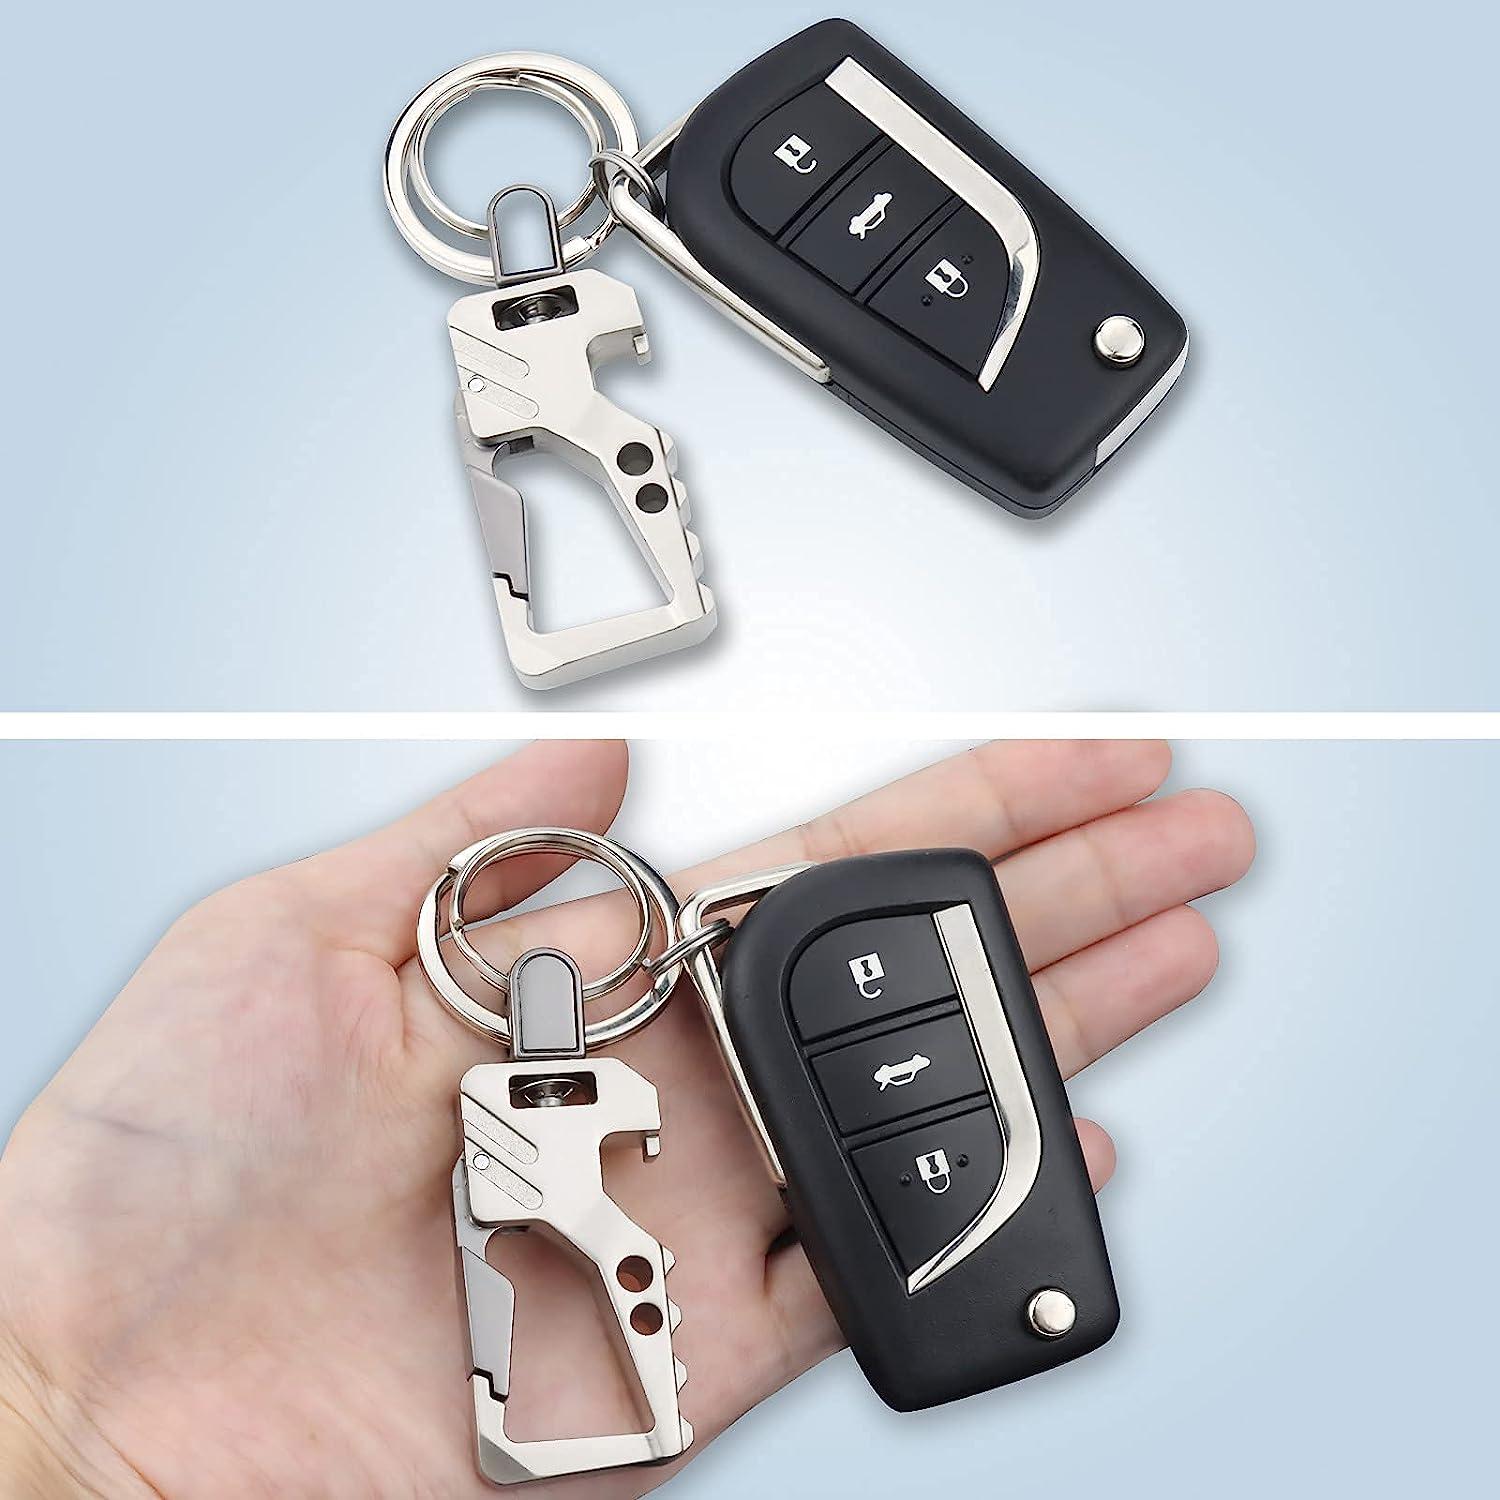 Car Key Chain For Men, Car Key Keychains With 2 Keyrings - Key Chains  Women For Car Keys, Quick Release Design, Detachable Key Chain Rings